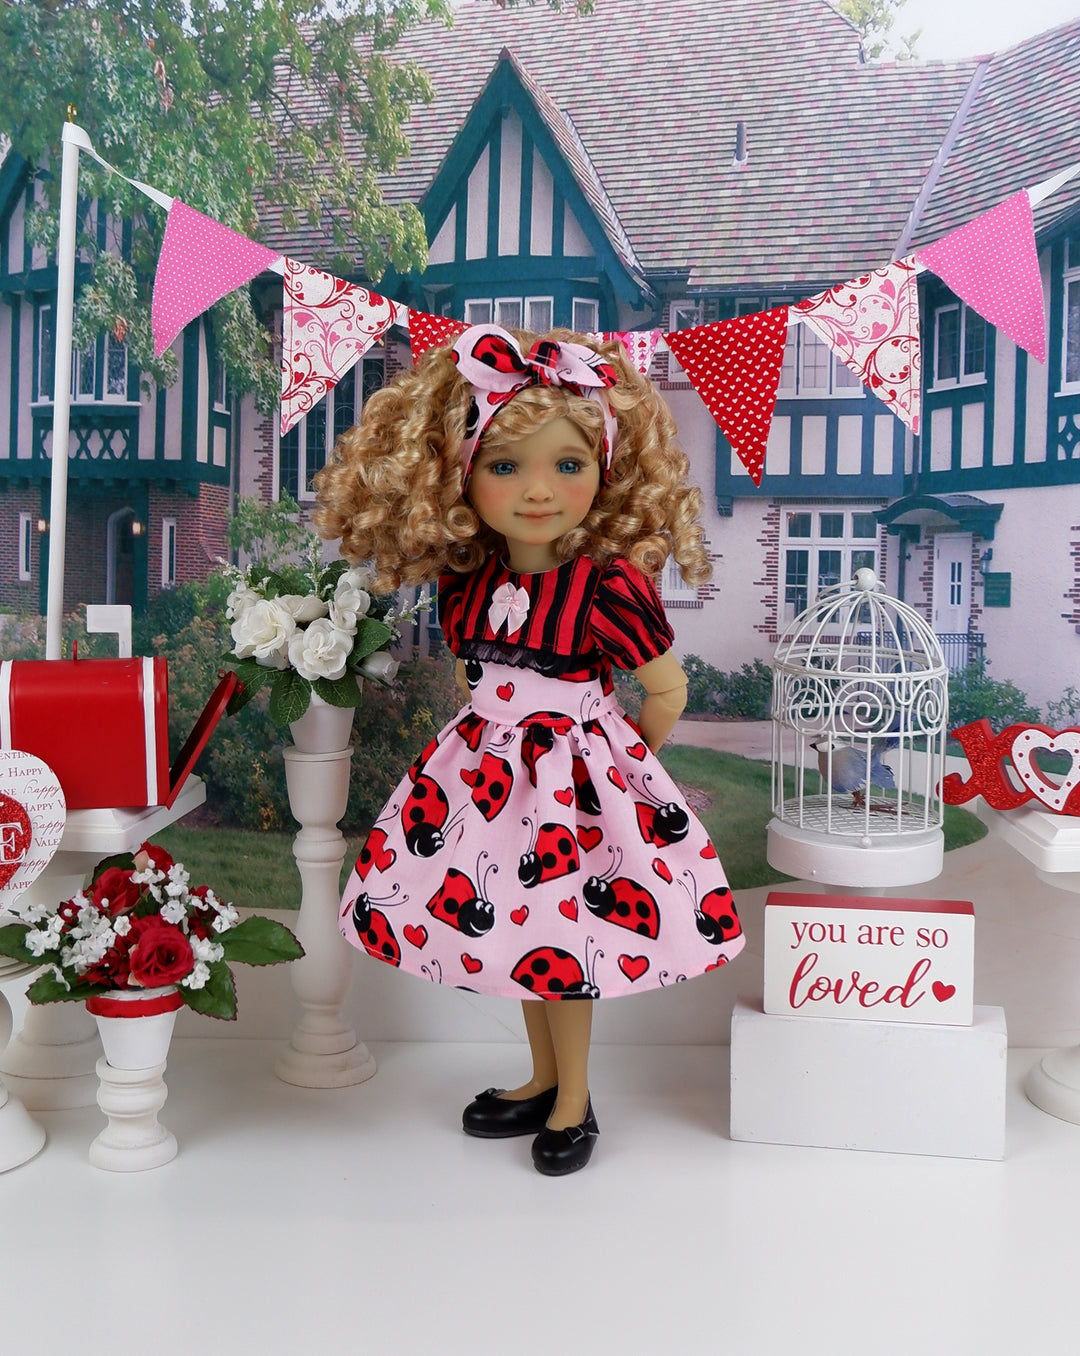 Love Bug - dress and shoes for Ruby Red Fashion Friends doll